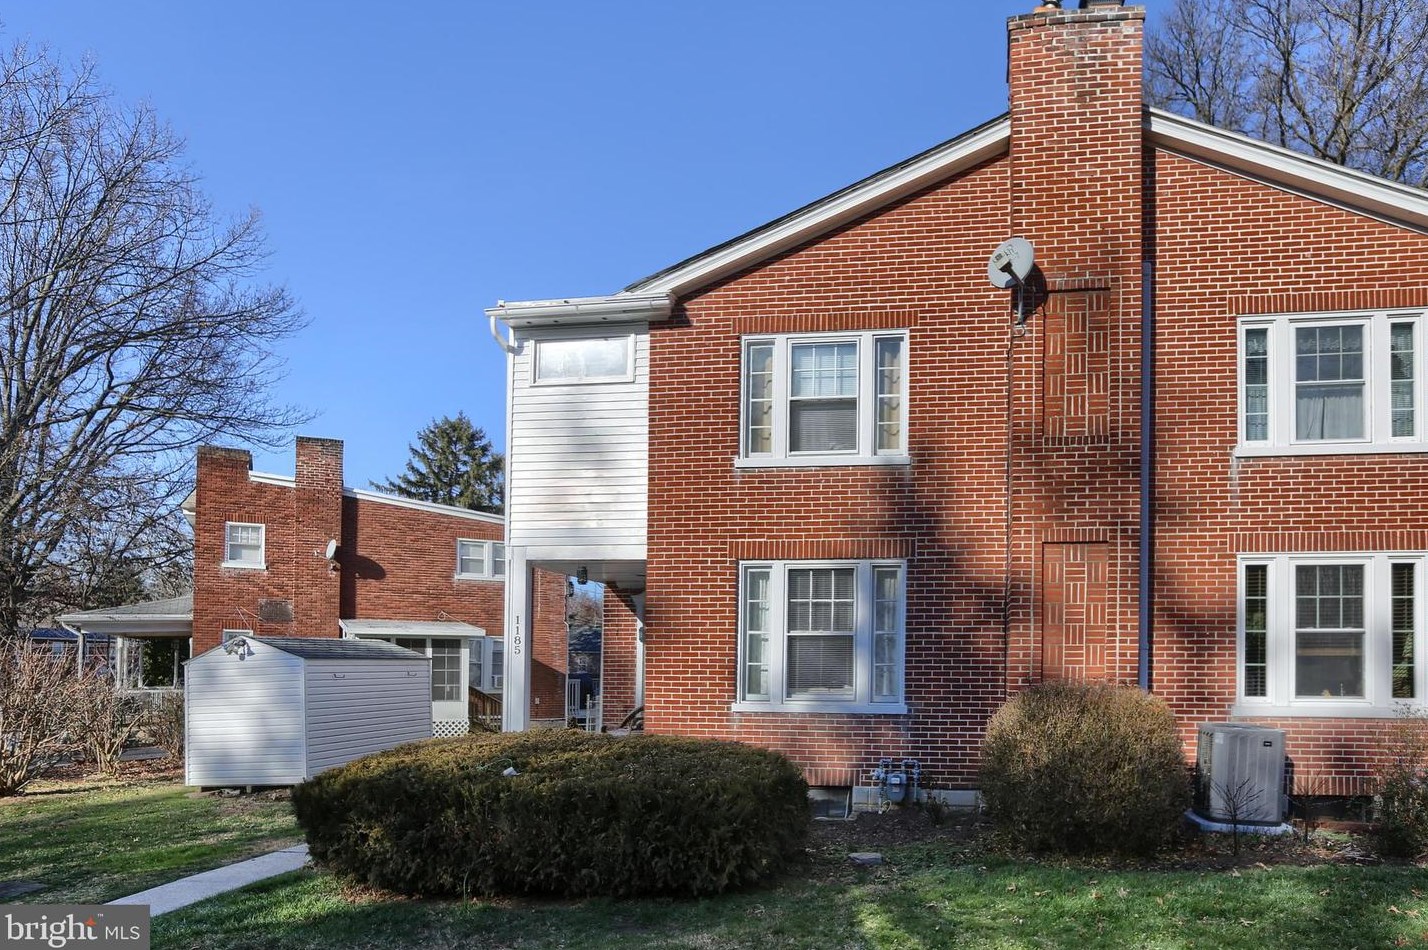 1185 Spring Grove Ave, Lancaster, PA 17603